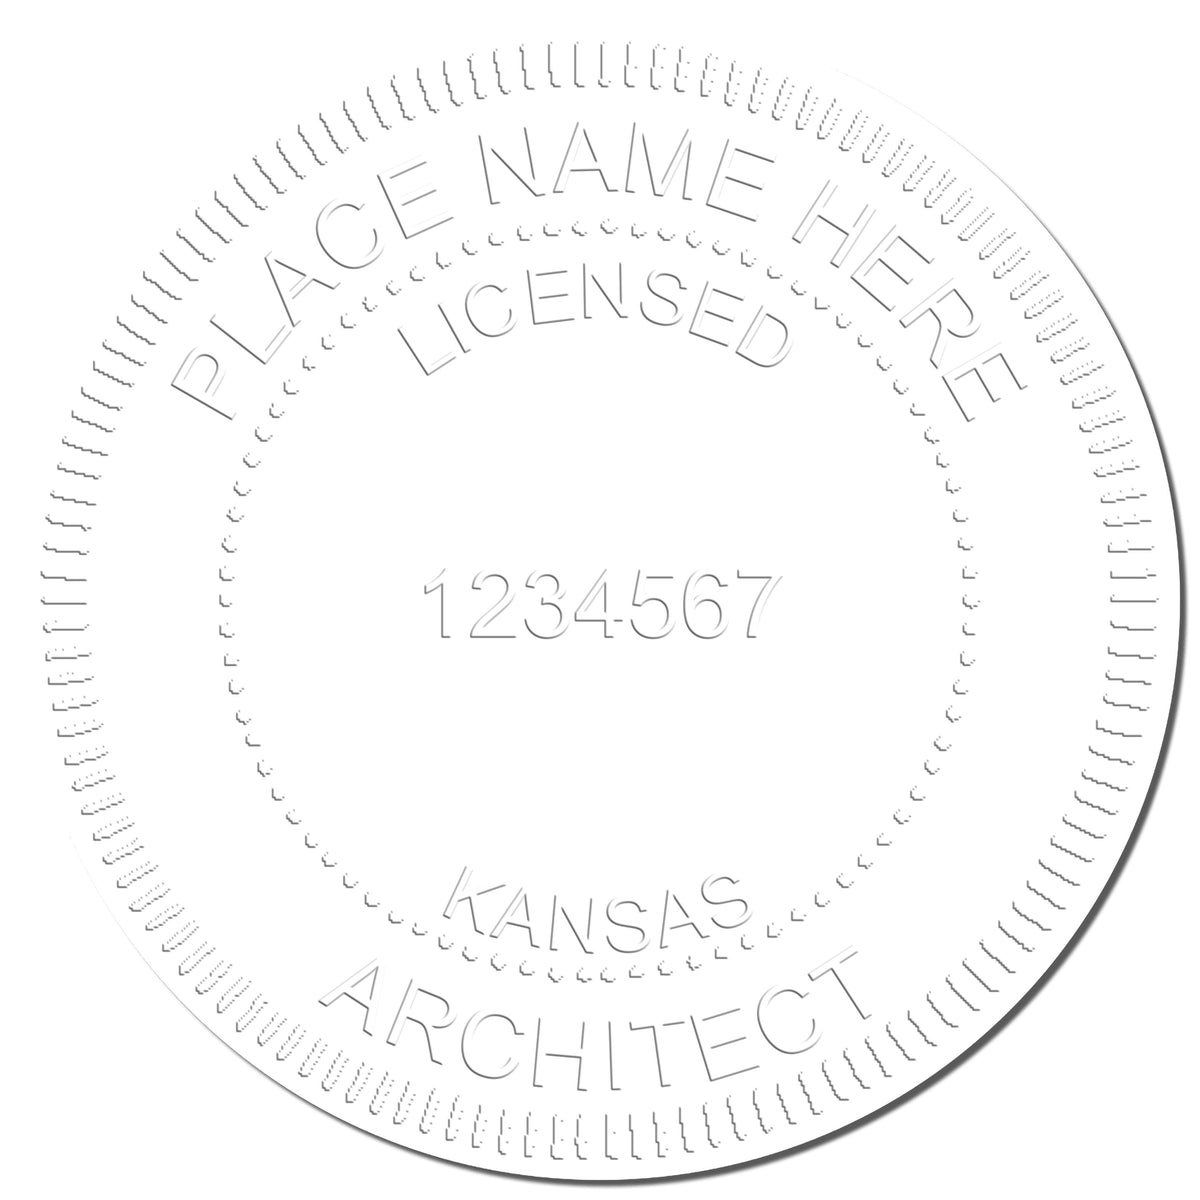 This paper is stamped with a sample imprint of the State of Kansas Architectural Seal Embosser, signifying its quality and reliability.